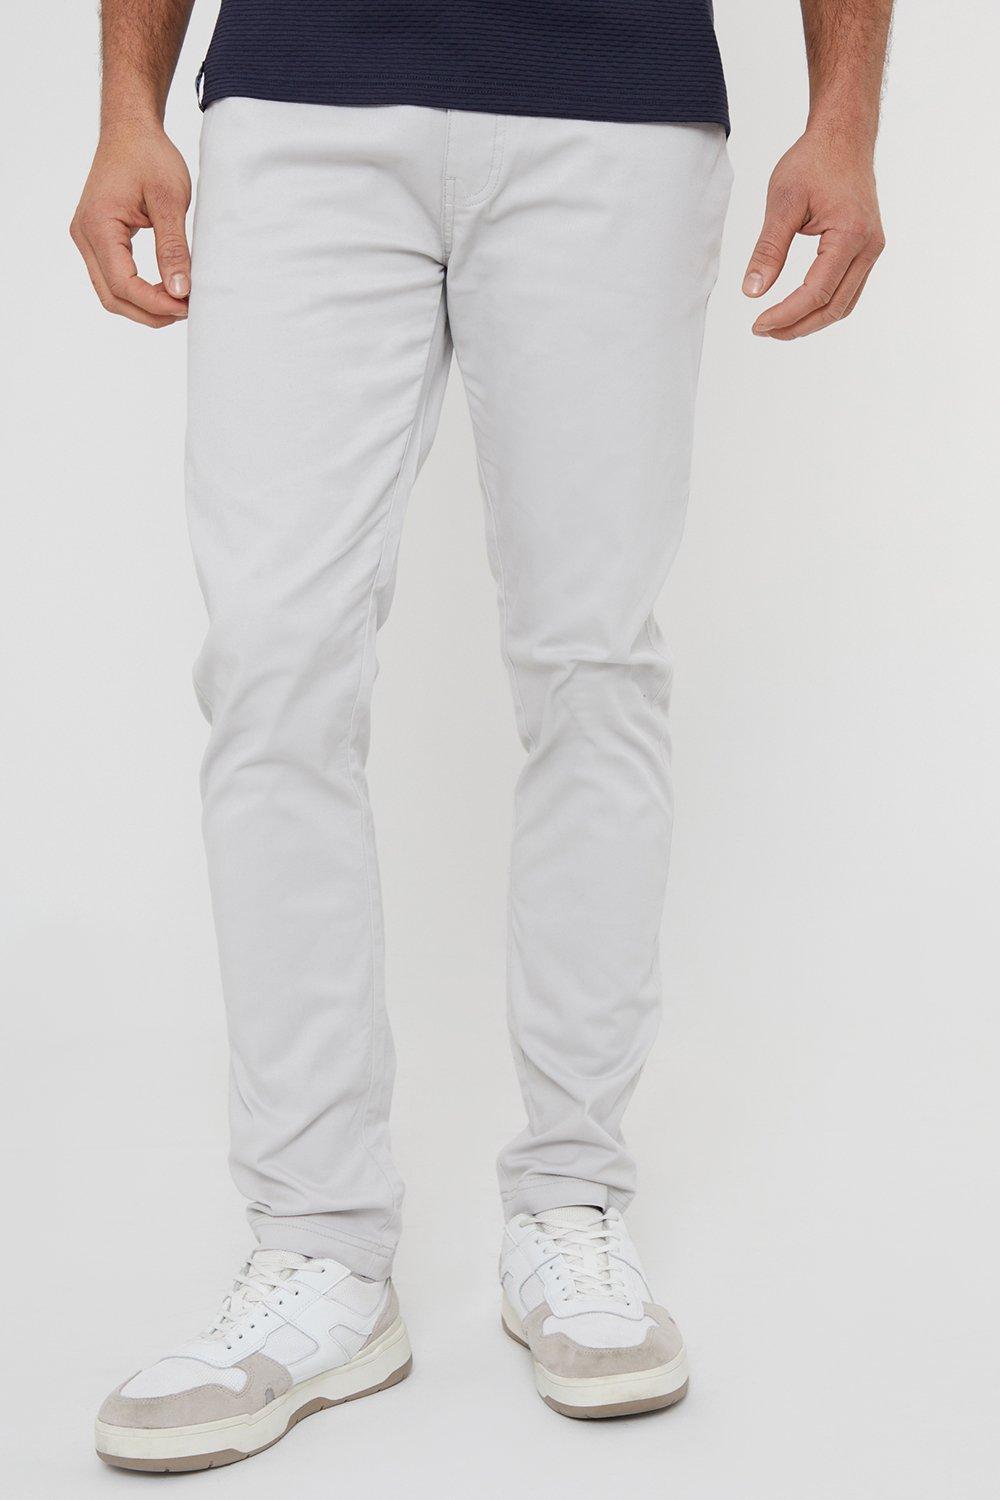 'Castello' Cotton Slim Fit Chino Trousers With Stretch